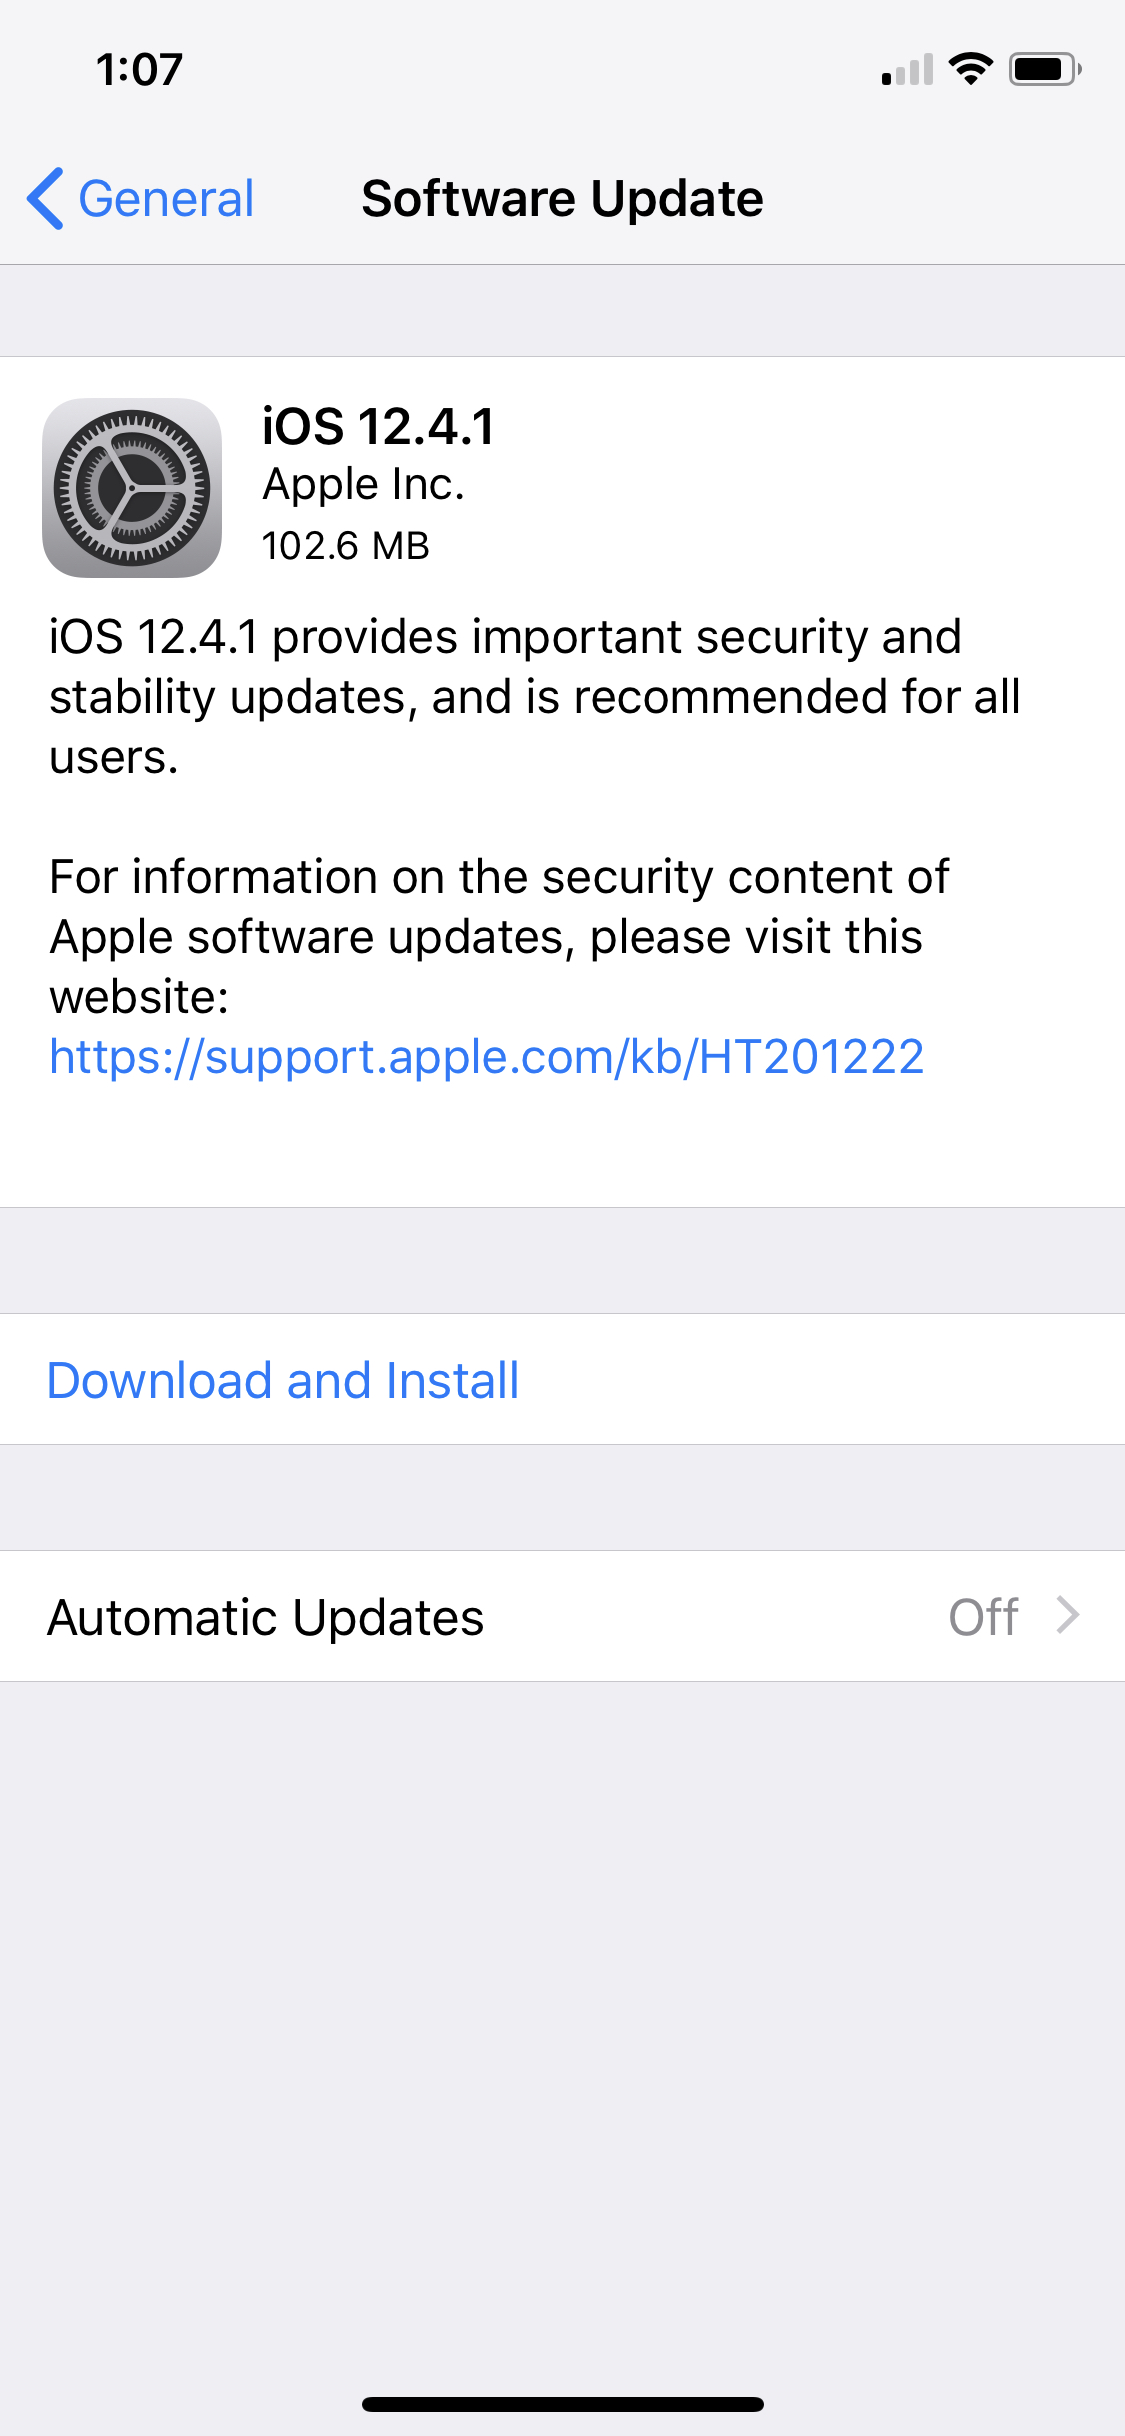 Apple Releases iOS 12.4.1 for iPhone, iPad, iPod touch [Download]